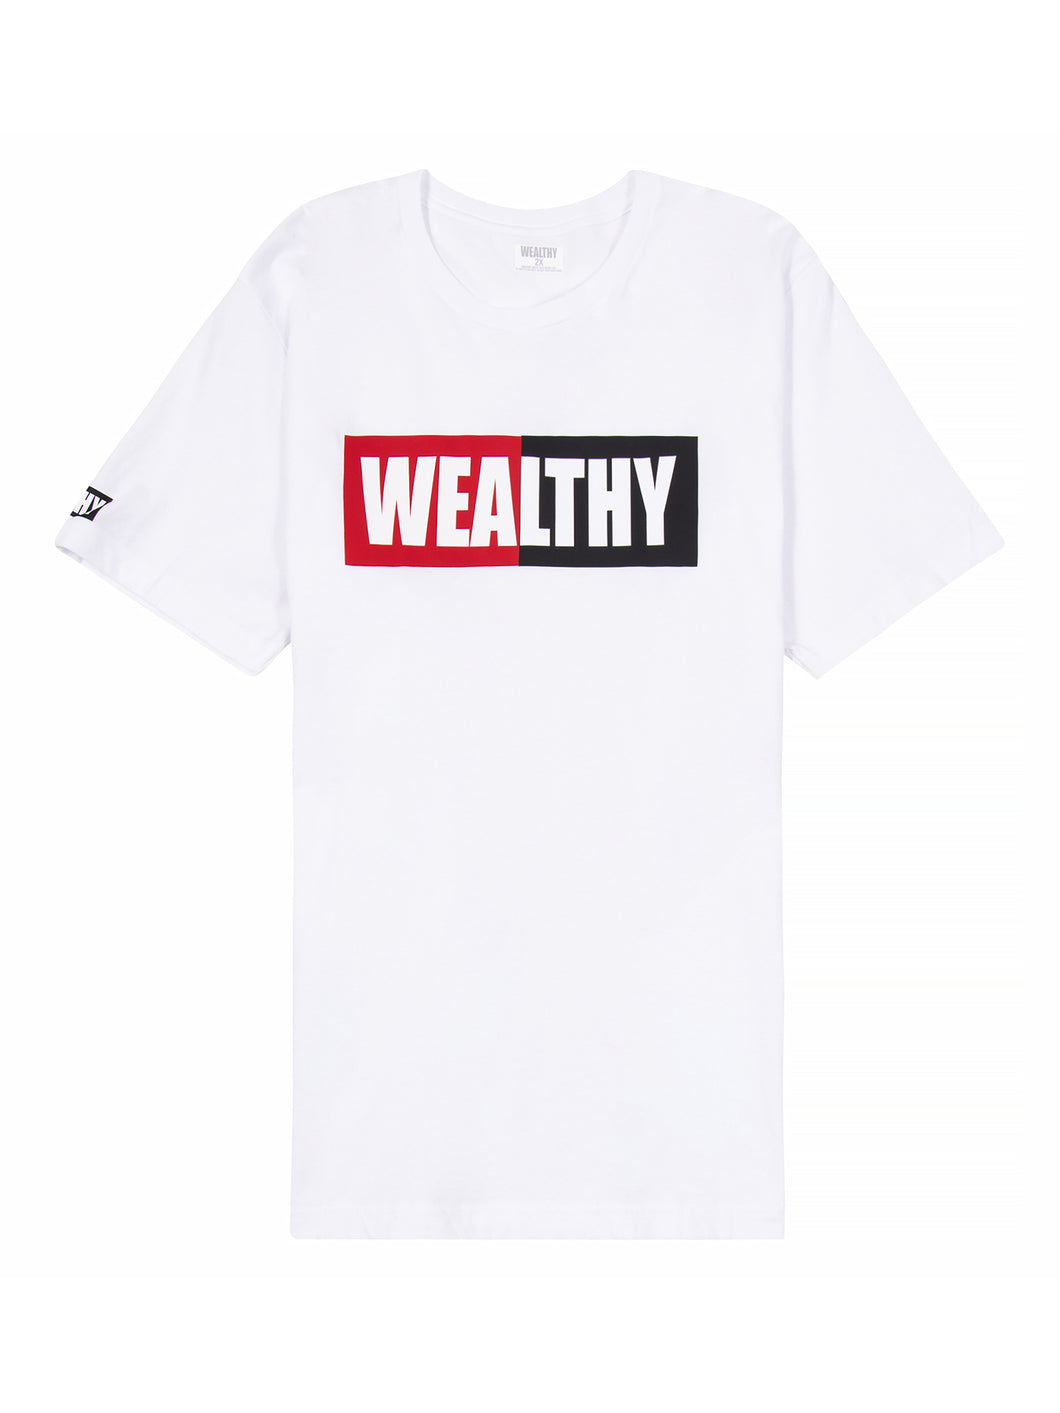 Wealthy Tee (White/Black/Red/White)